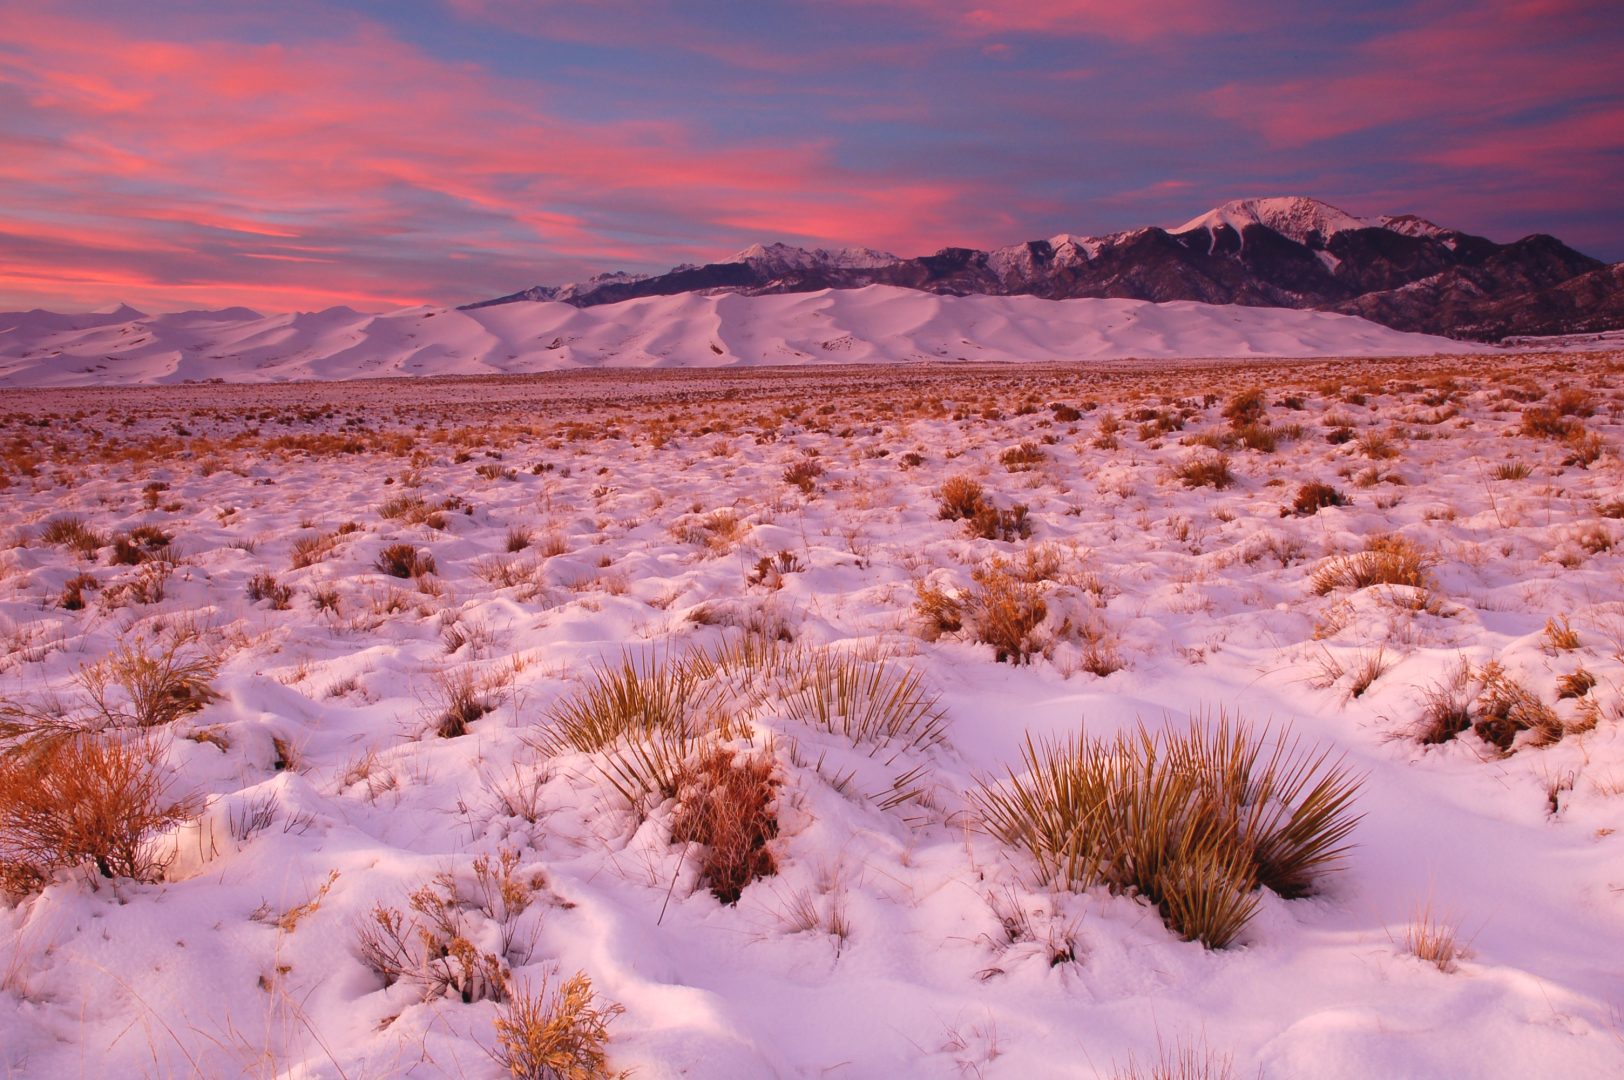 Snow blankets Great Sand Dunes national park with tufts of grasslands poking through. Pink sunset